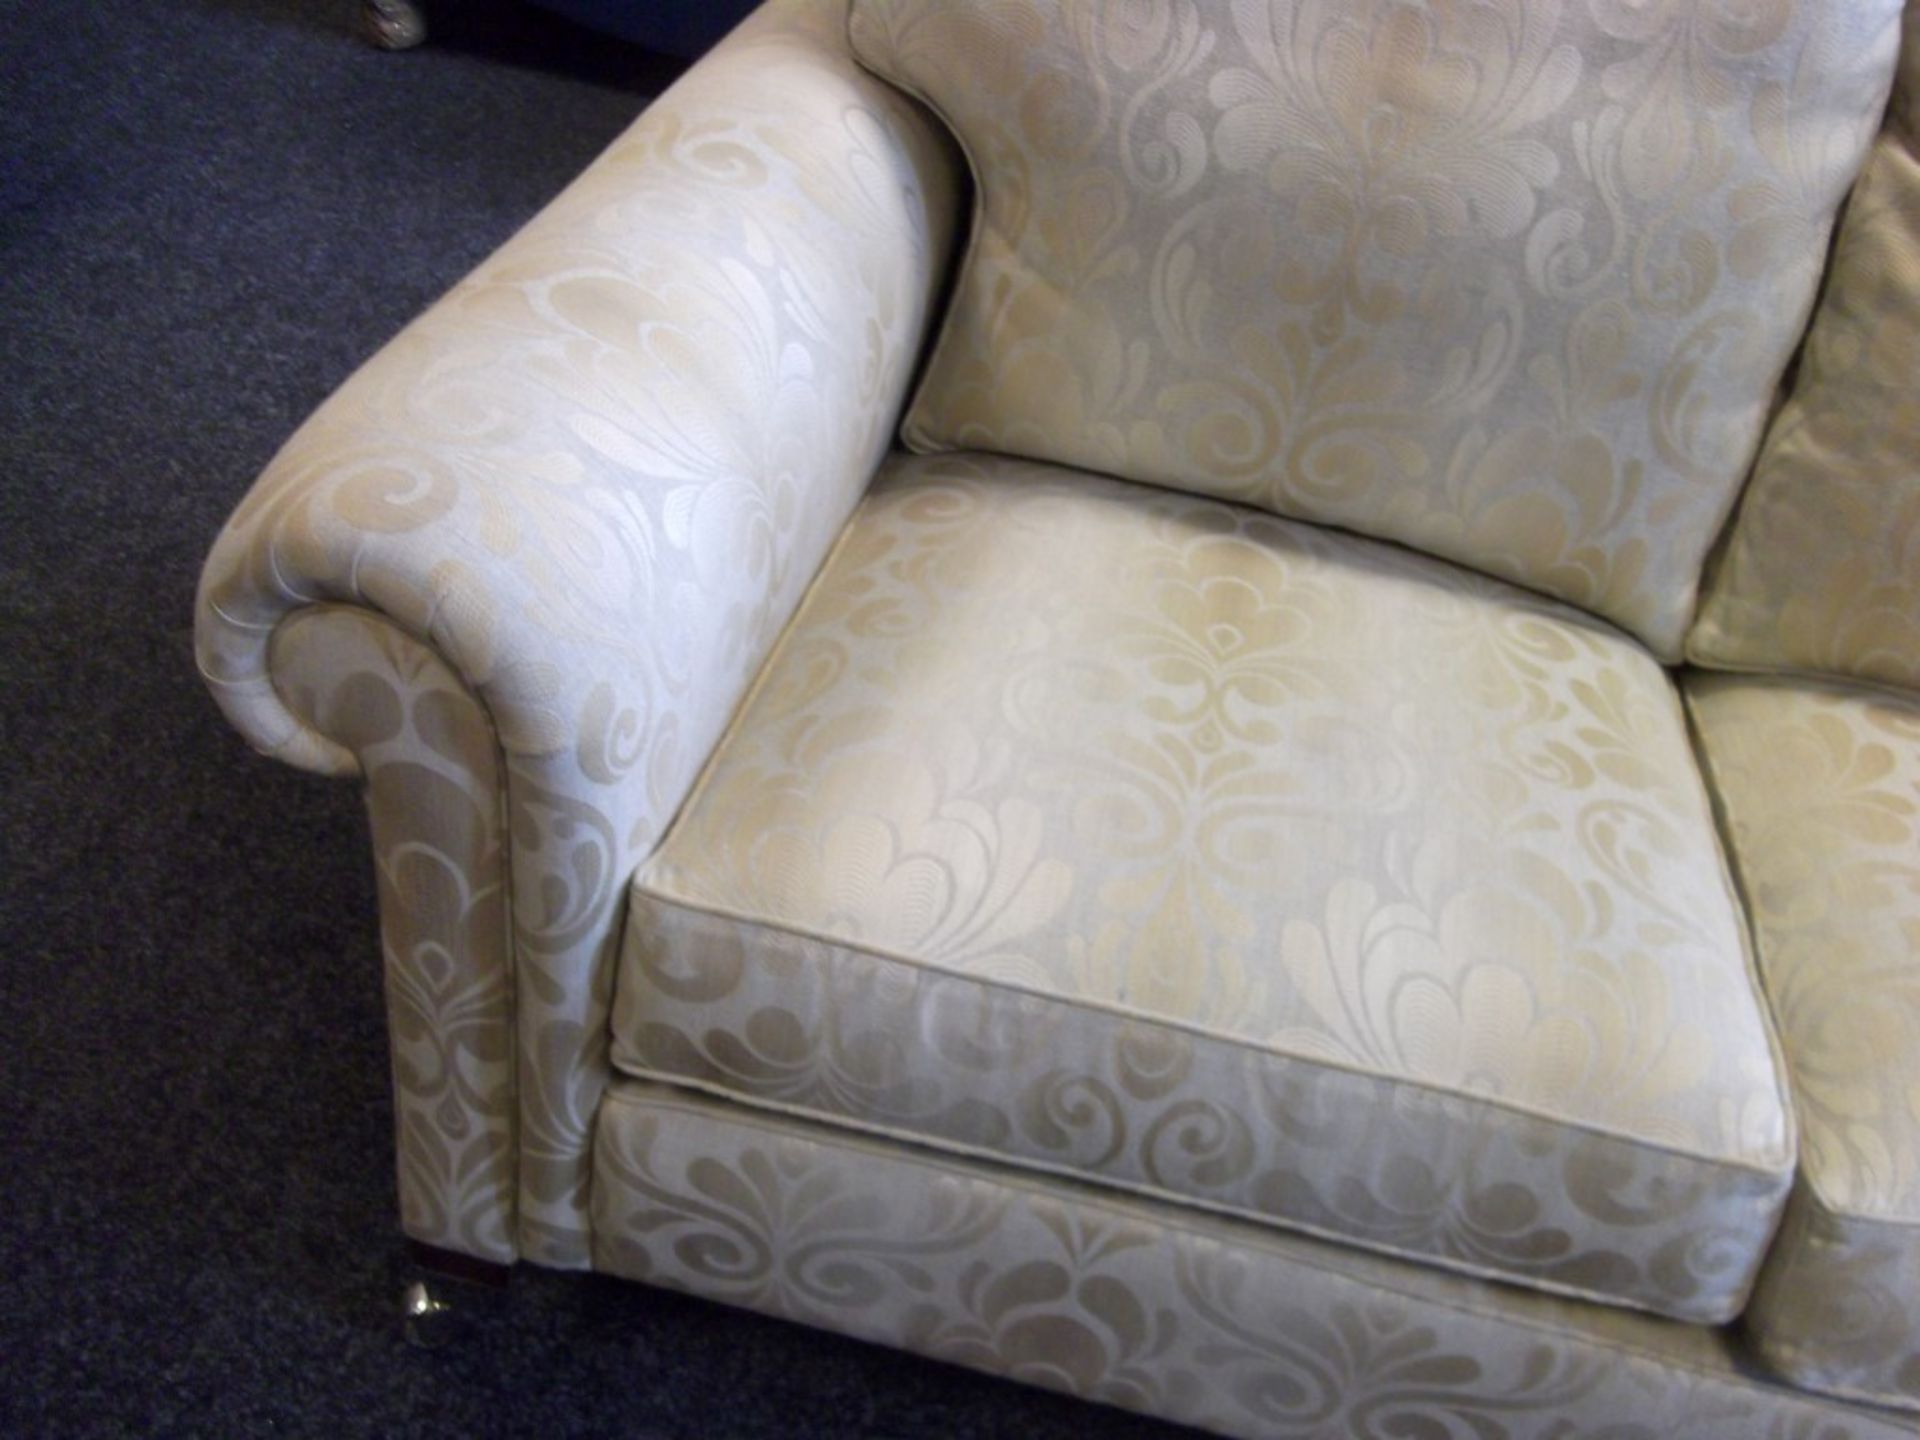 1 x DURESTA 'Portsmouth' 2-Seater Sofa - Ex Display Stock In Great Condition – CL156 - Dimensions: - Image 2 of 3